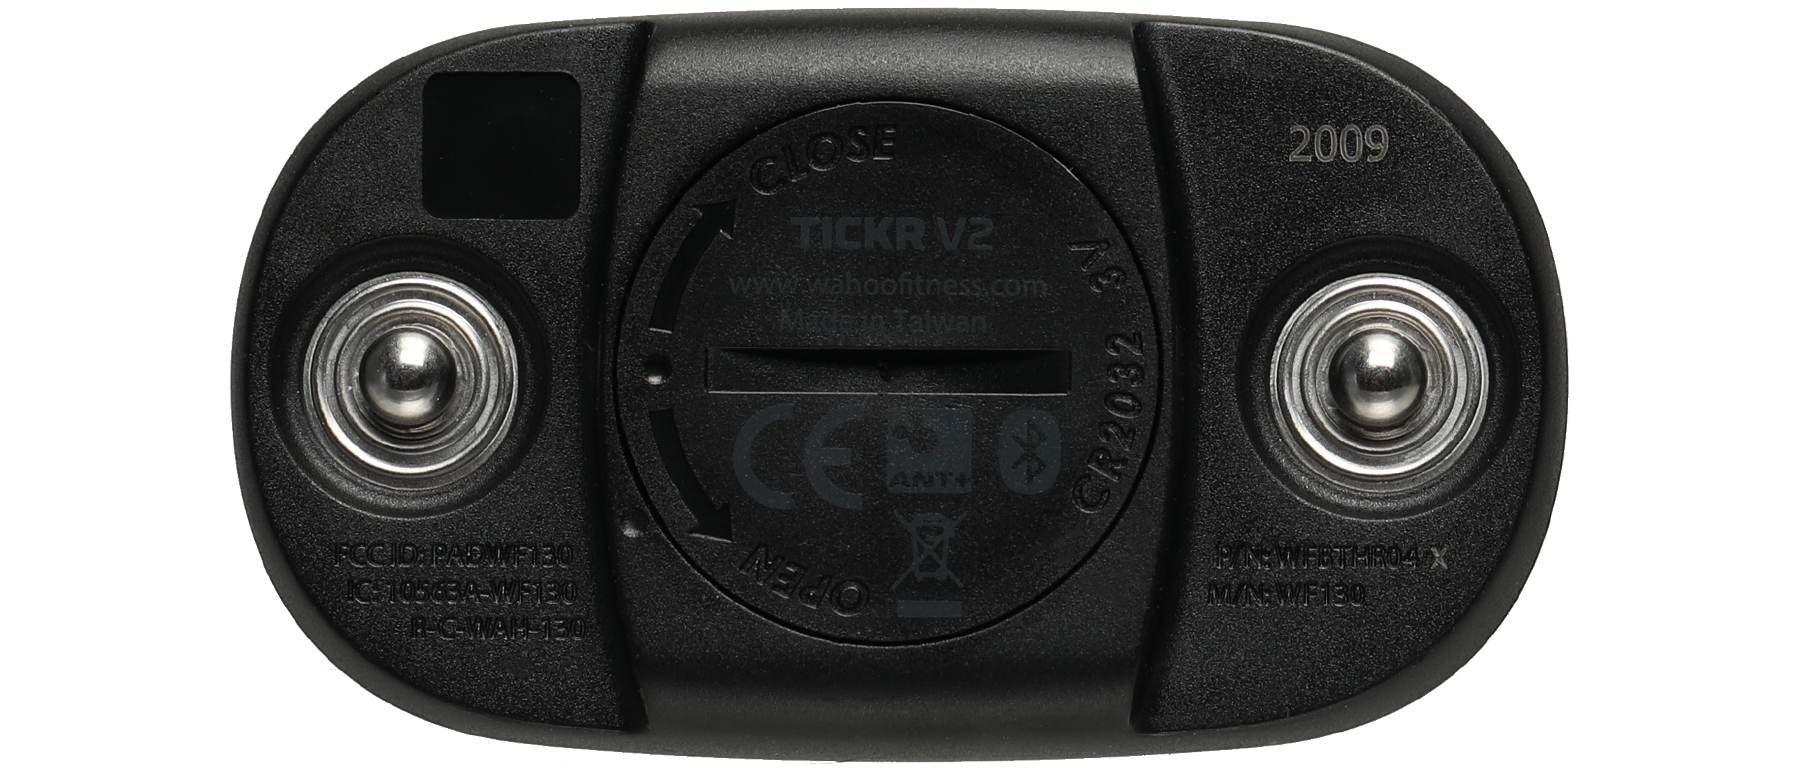 Wahoo Tickr 2 X Workout Tracker with Memory